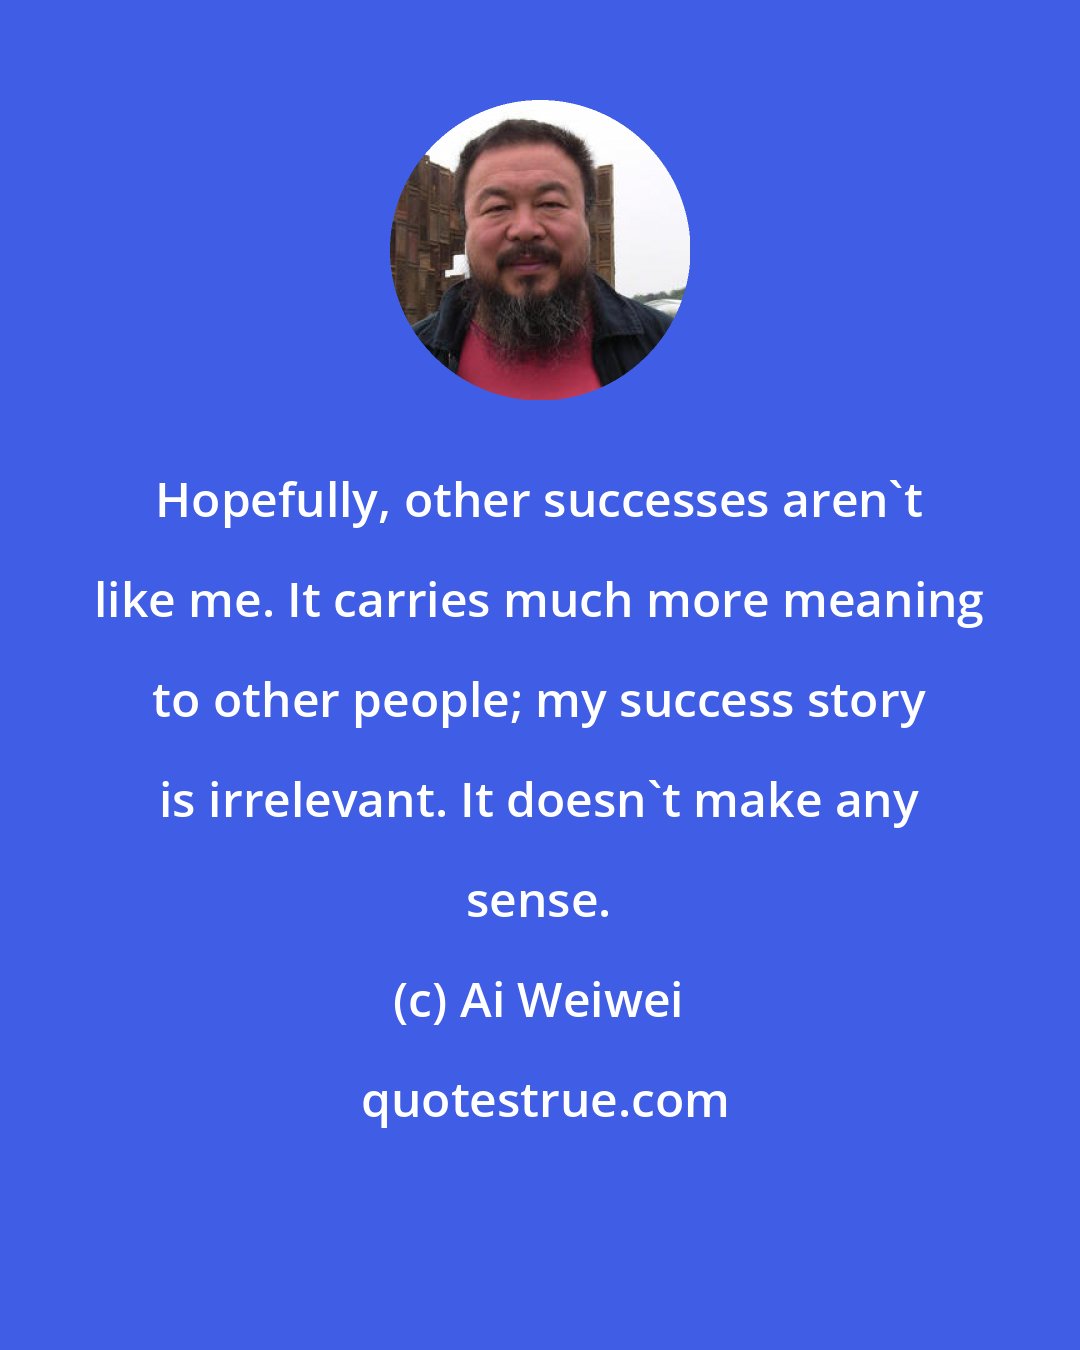 Ai Weiwei: Hopefully, other successes aren't like me. It carries much more meaning to other people; my success story is irrelevant. It doesn't make any sense.